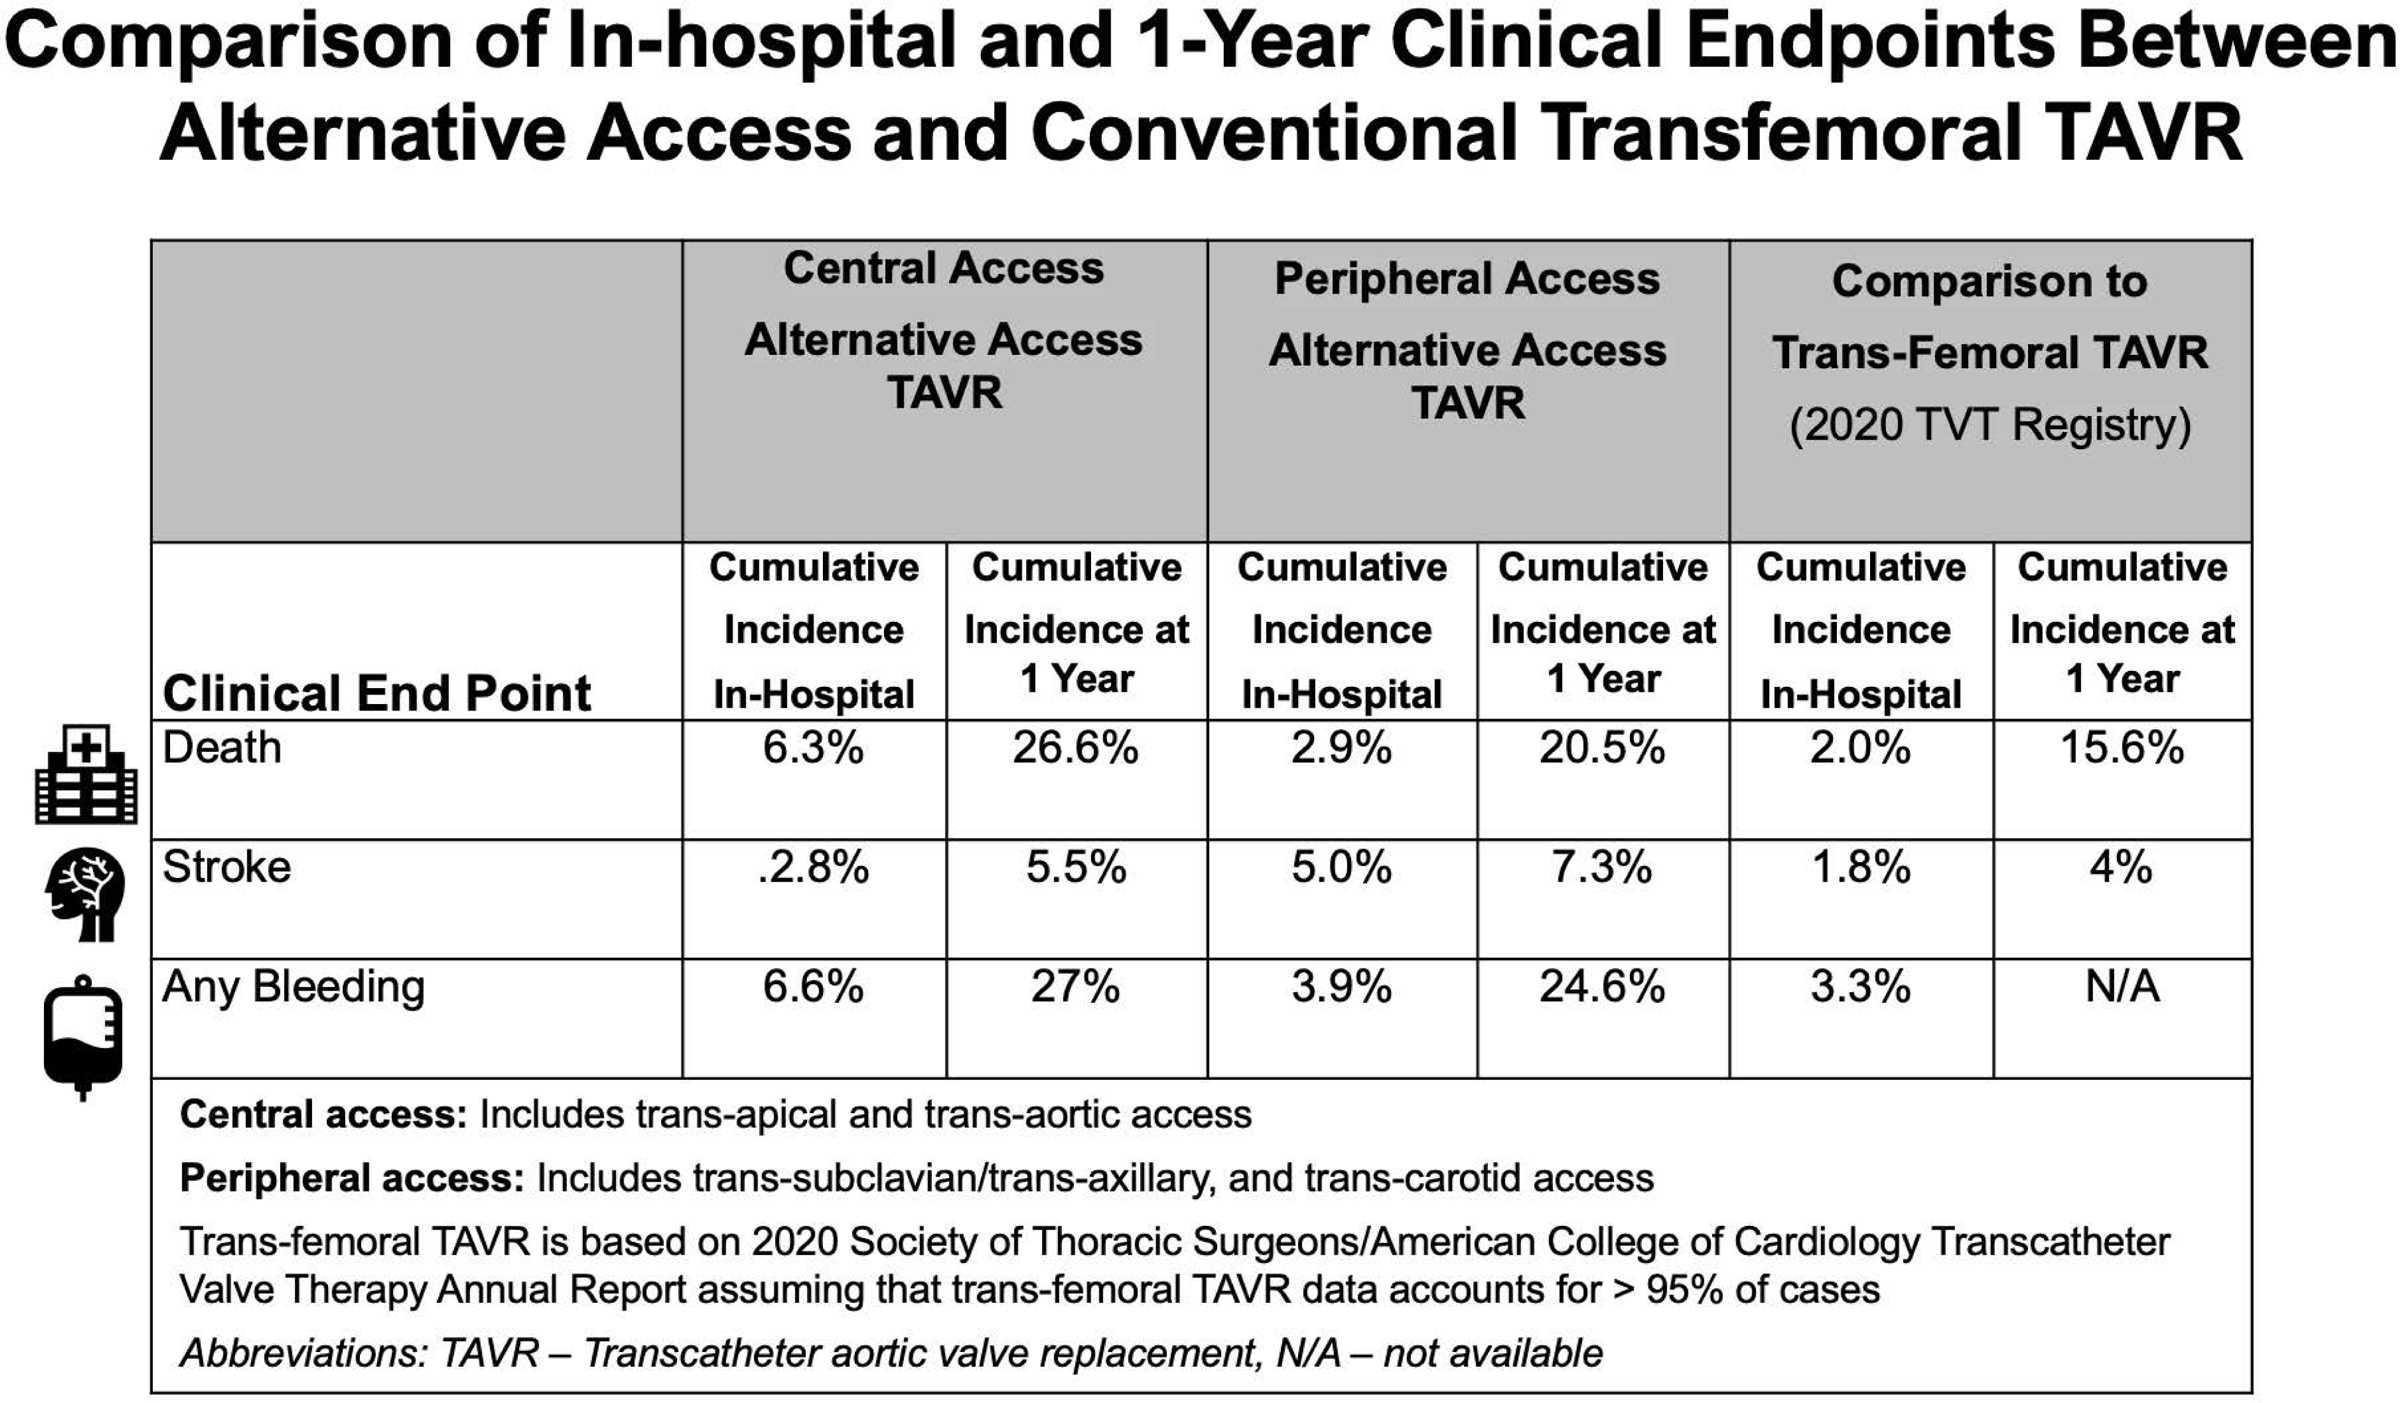 Association Between Peripheral Versus Central Access for Alternative Access Transcatheter Aortic Valve Replacement and Mortality and Stroke: A Report From the Society of Thoracic Surgeons/American College of Cardiology Transcatheter Valve Therapy Registry